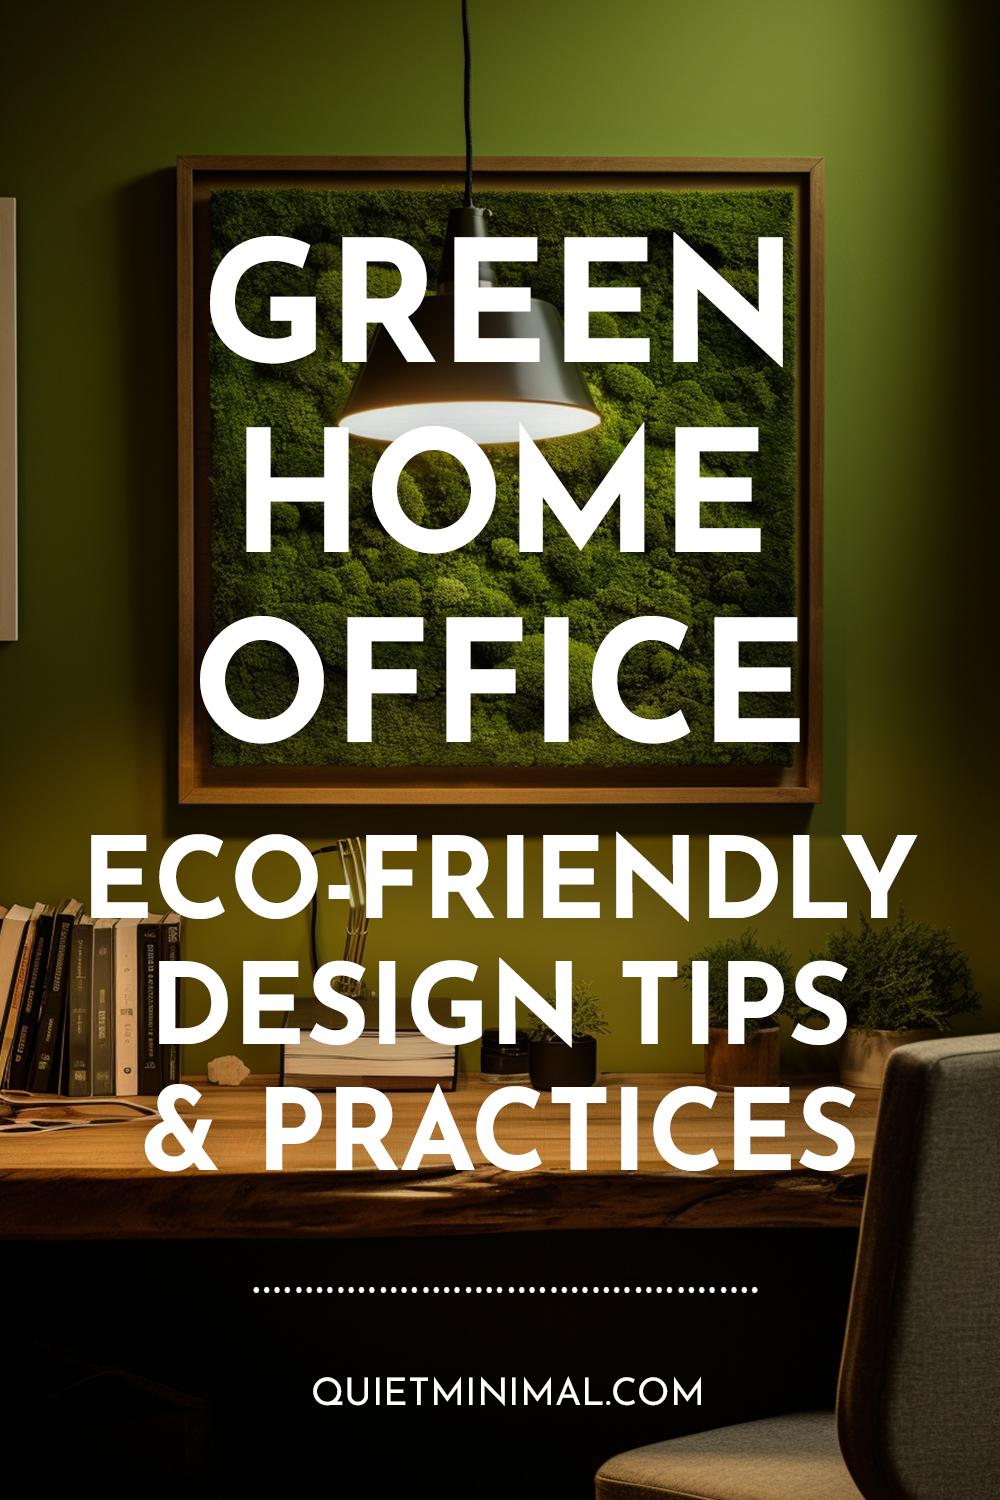 Green Home Office Environmentally Friendly Design Tips and Practices